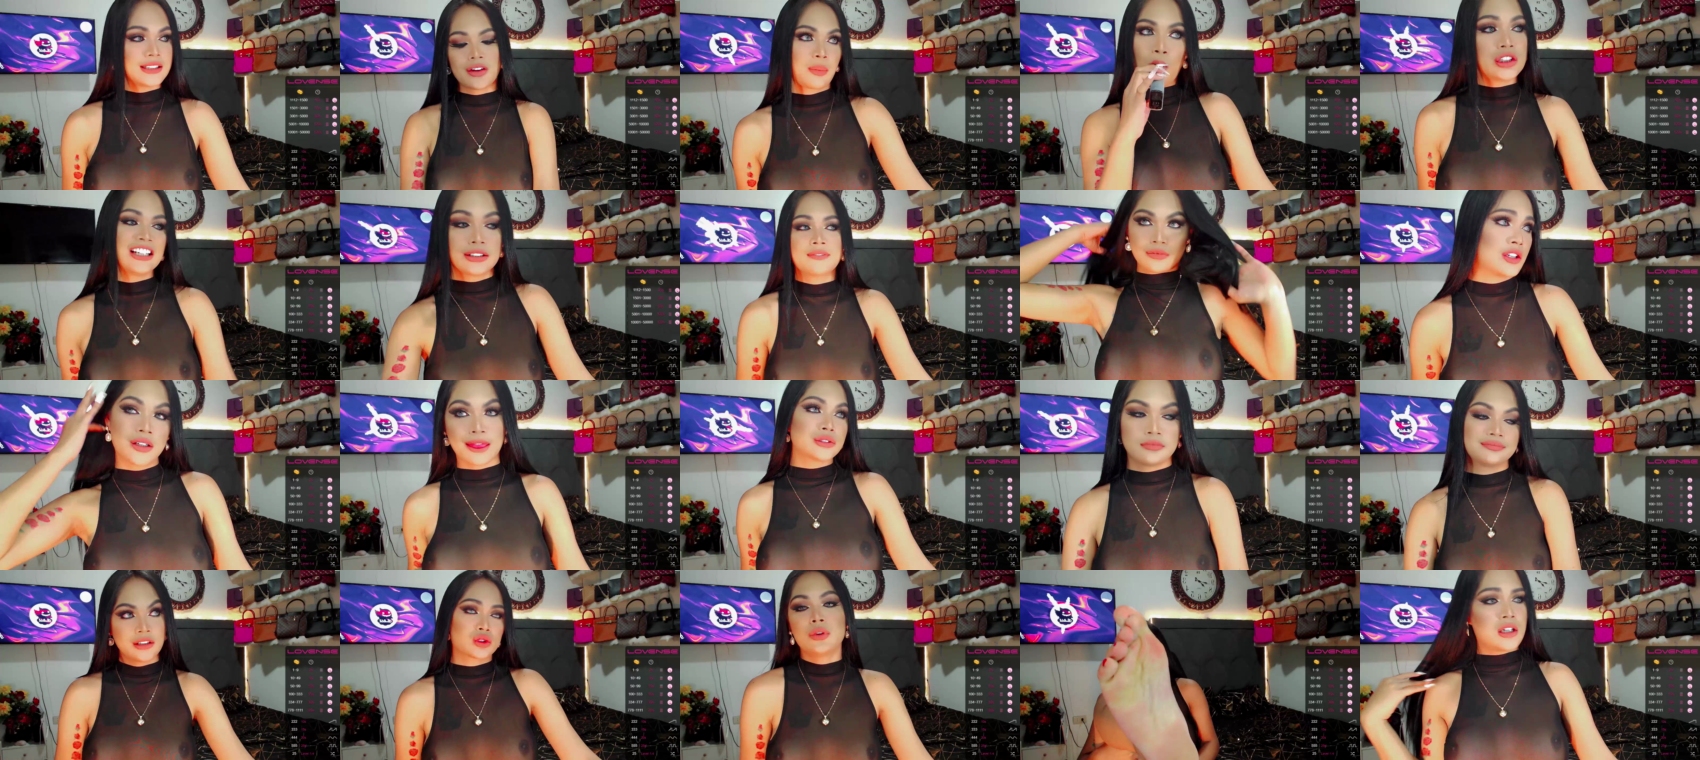 divinequeen ts 04-09-2022  trans sexybody